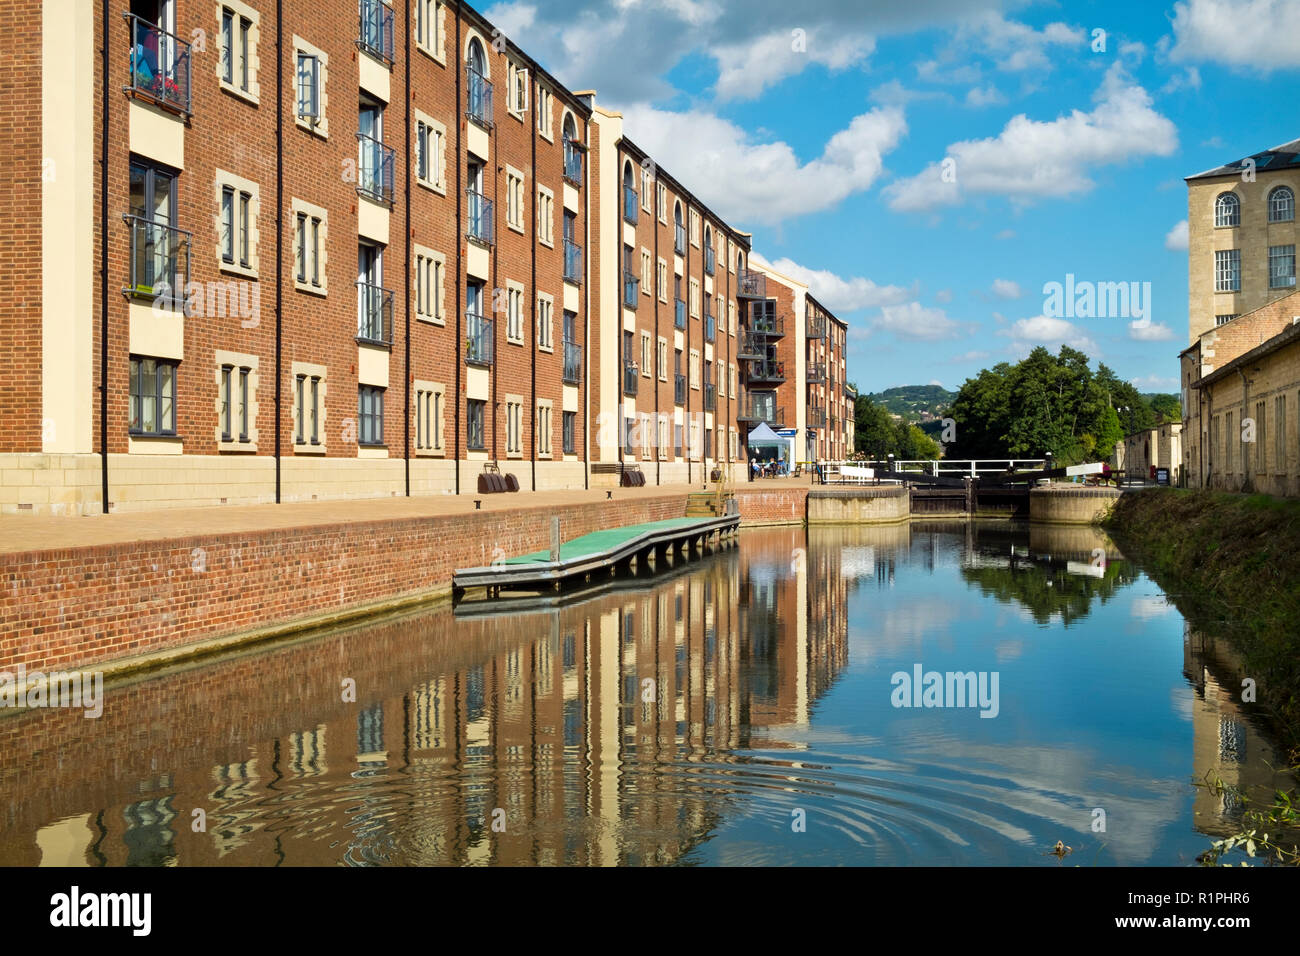 Stroud, Gloucestershire, UK - 26th August 2016: Summer sunshine brings people out to enjoy the regenerated Stroudwater Canal project at Ebley, Stroud, Gloucestershire, UK. Recently built apartment buildings enhance the waterside around historic Ebley Mill. Stock Photo